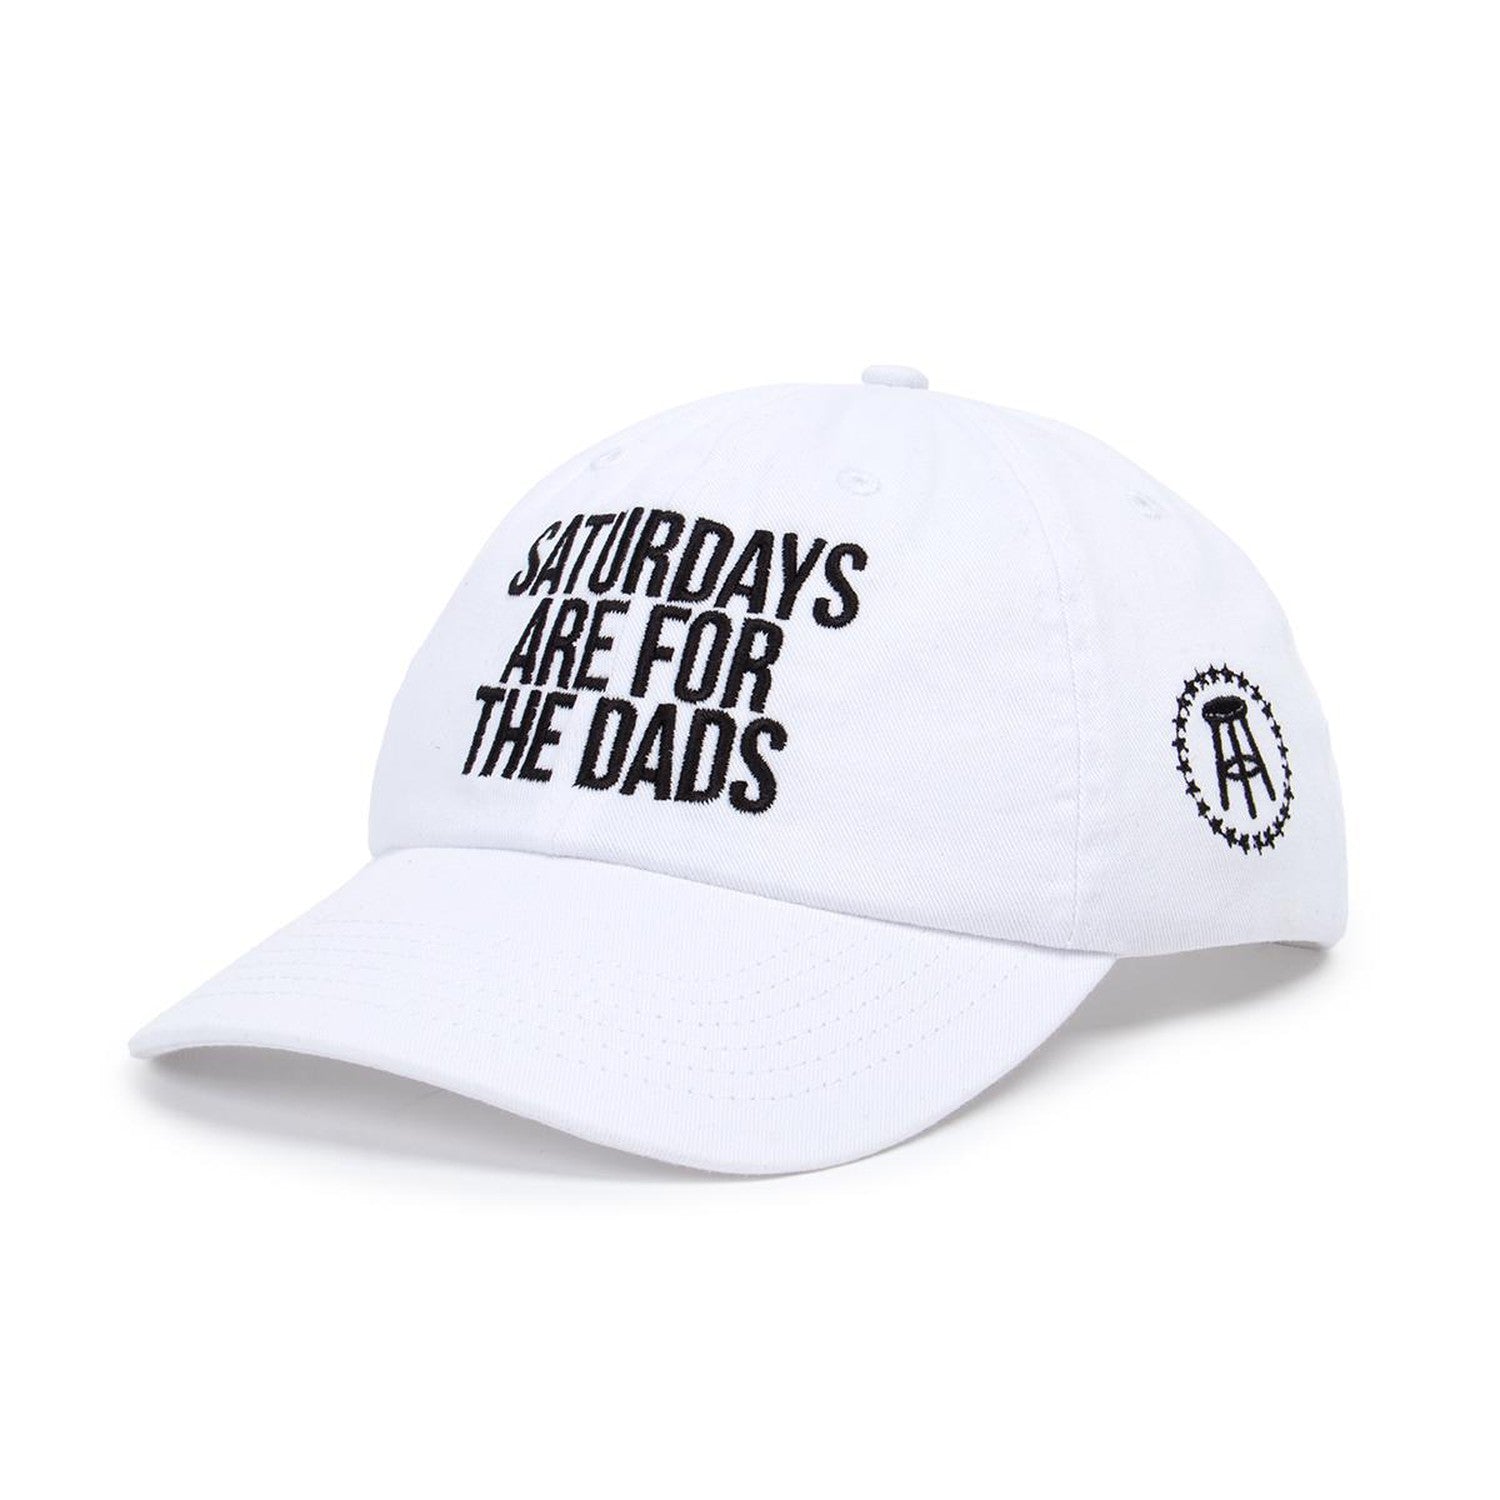 Saturdays Are For The Dads Dad Hat-Hats-SAFTB-White-Barstool Sports